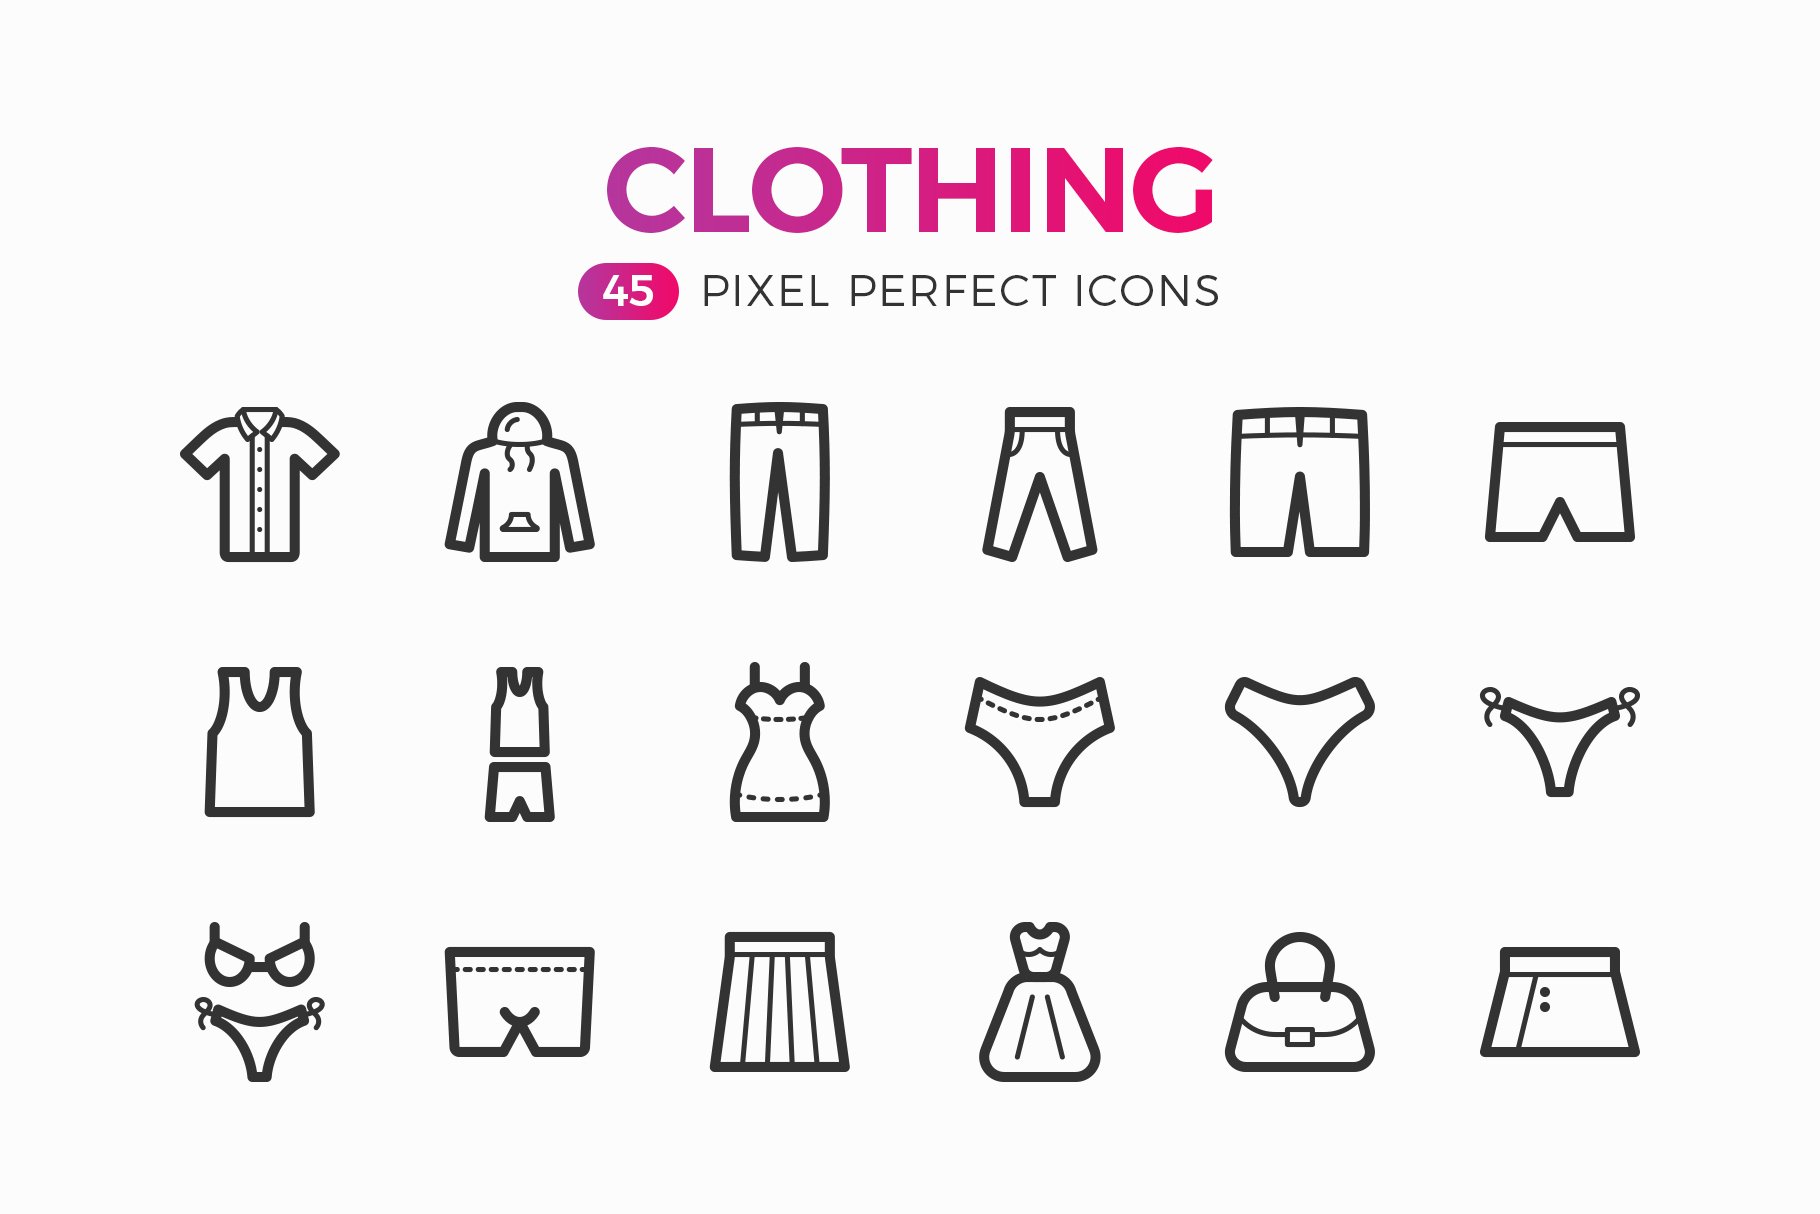 Clothes & Accessory Line Icons Pack cover image.